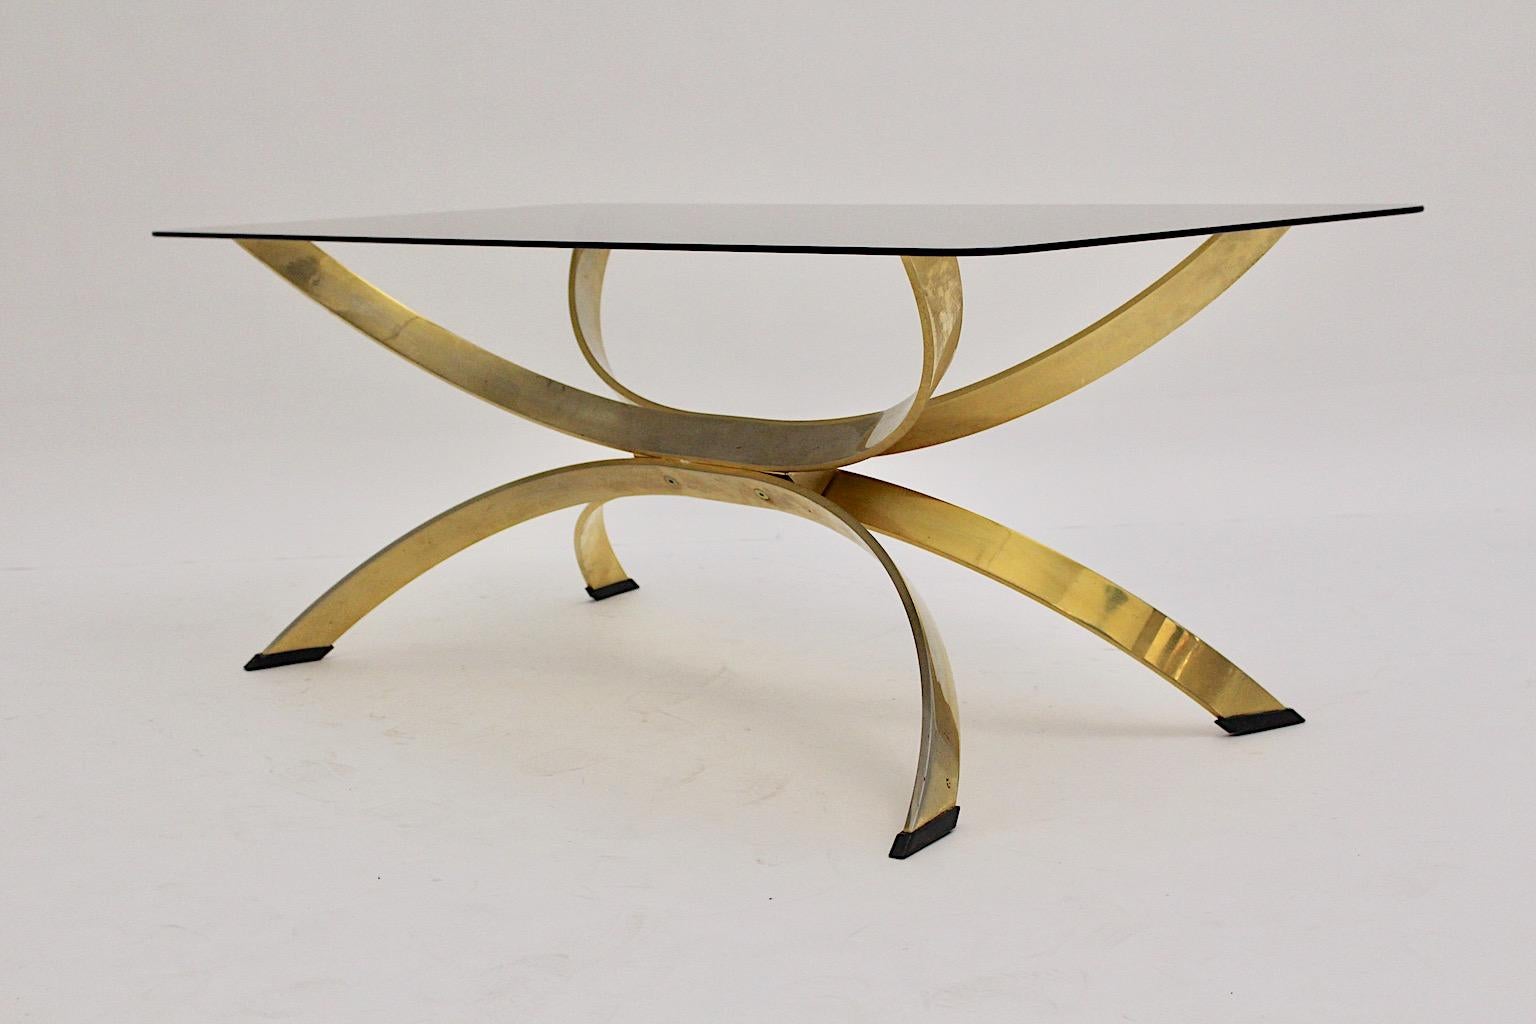 Brassed Metal Smoked Glass Sculptural Vintage Coffee Table Sofa Table 1970s For Sale 3